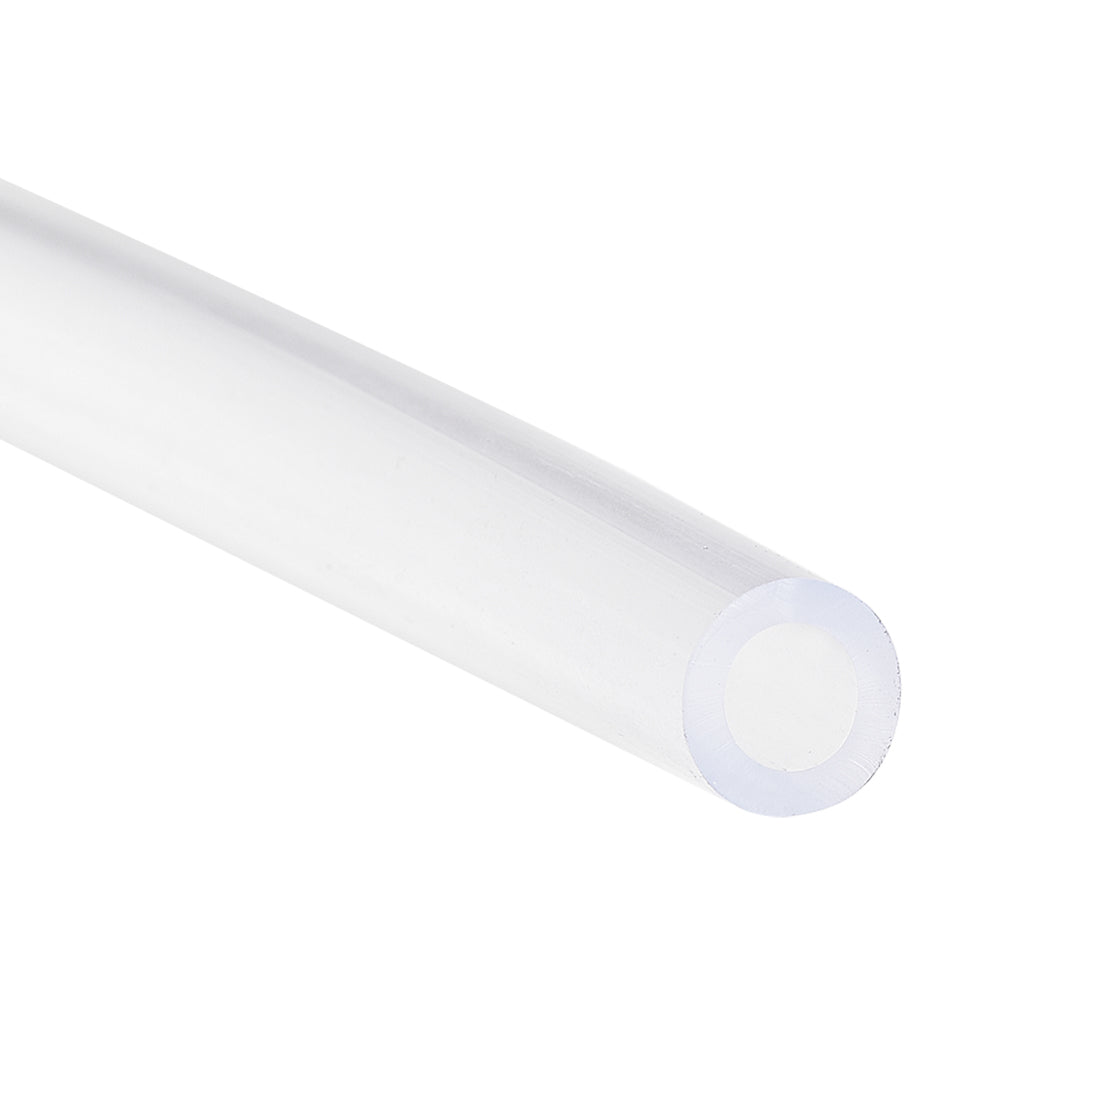 Uxcell Uxcell PVC Hose Tube, 8mm(0.31") ID x 10mm(0.39") OD 3 Meter Clear Vinyl Tubing